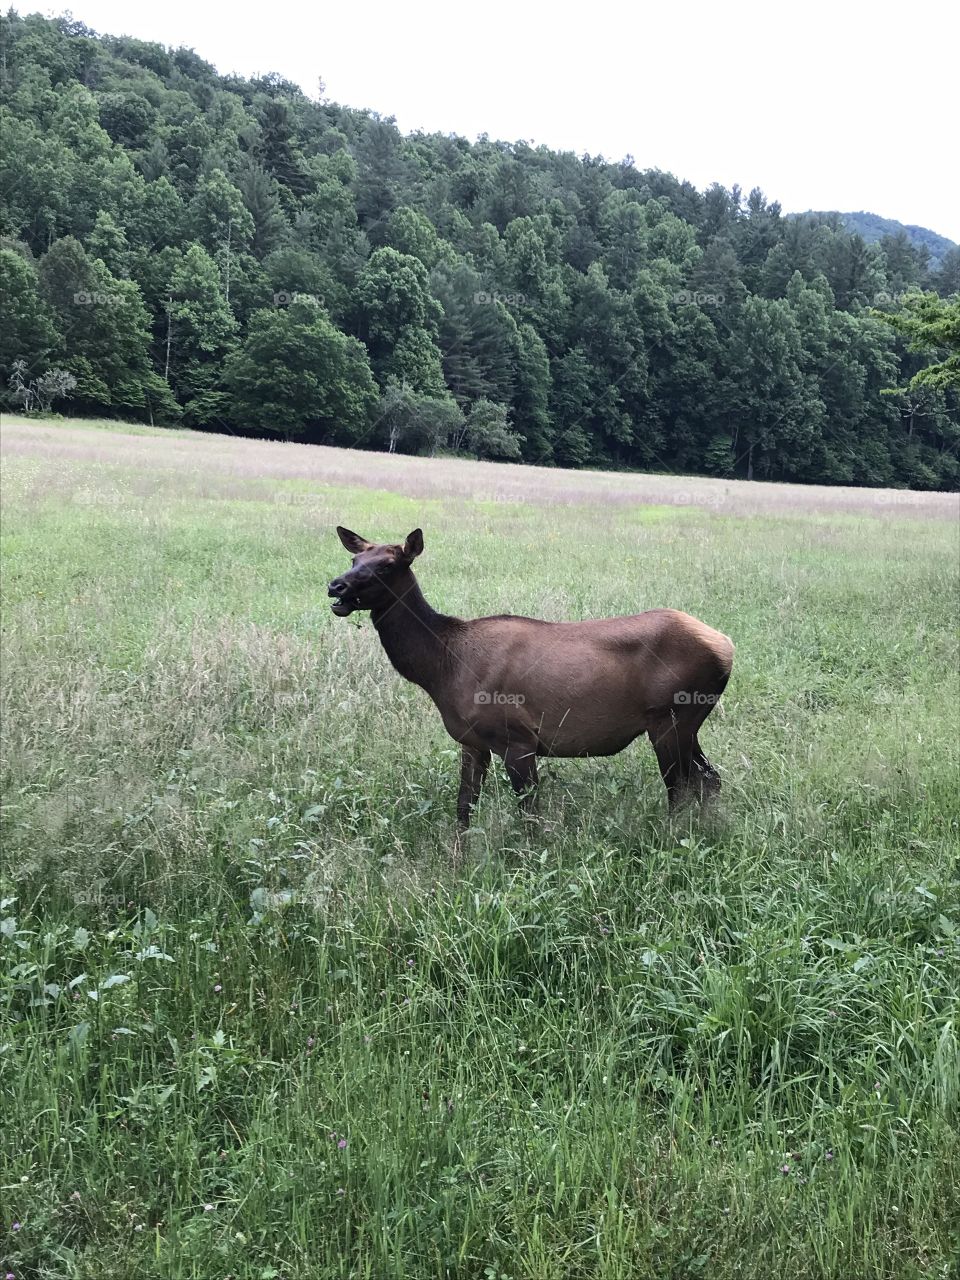 Female Elk, cow, grazing in a field in the mountains 